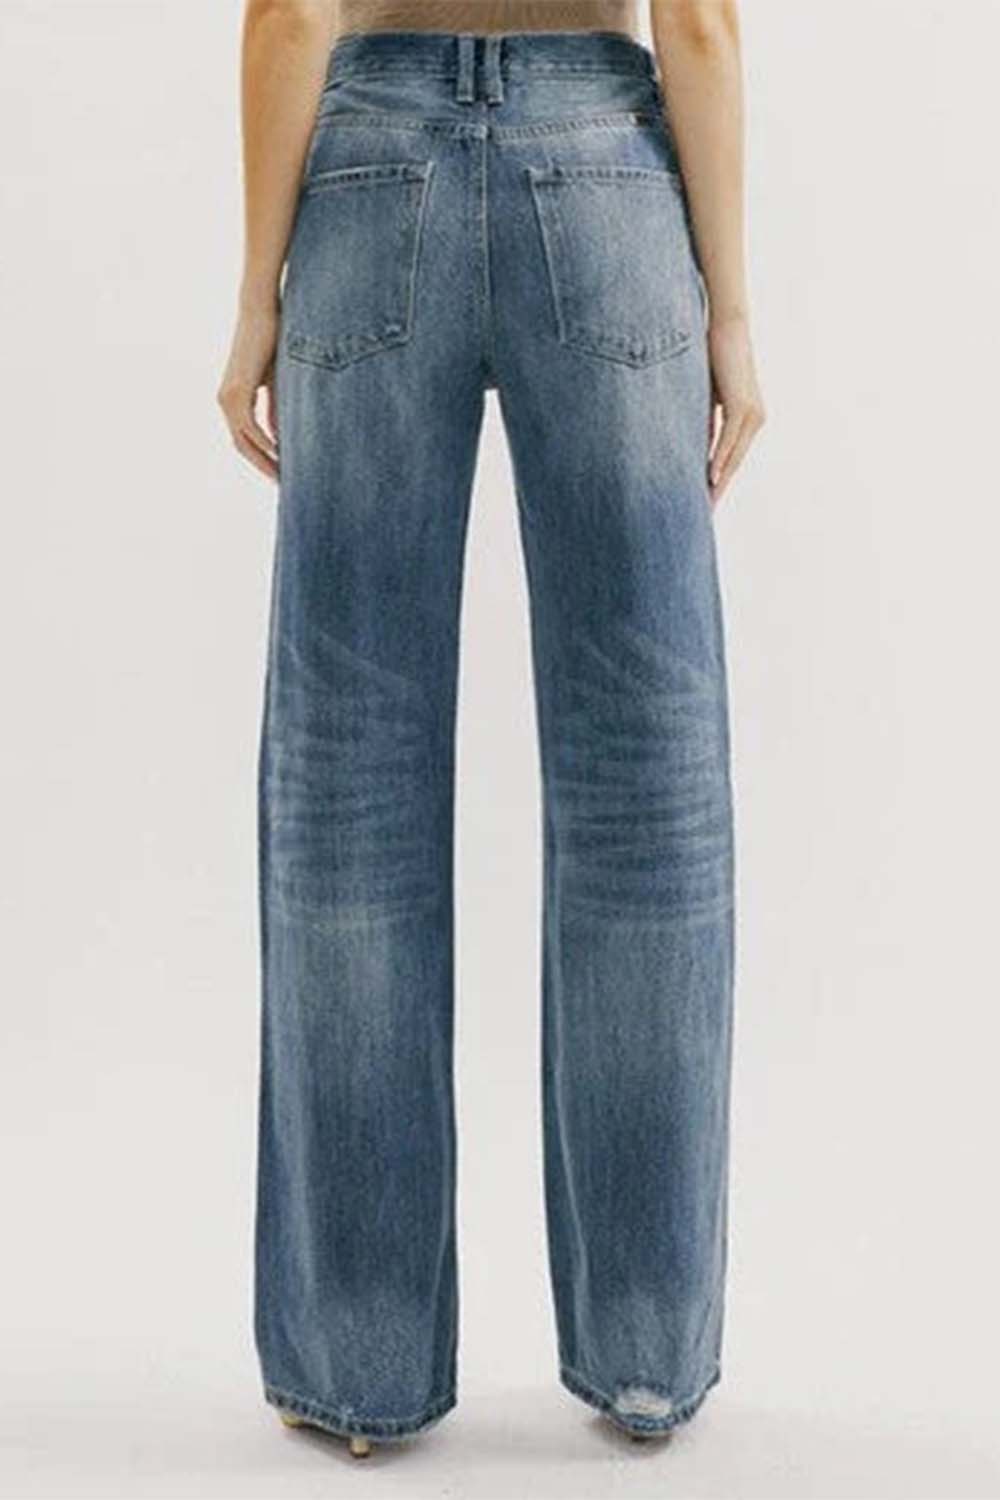 Button Fly Distressed Washed Jean Pants